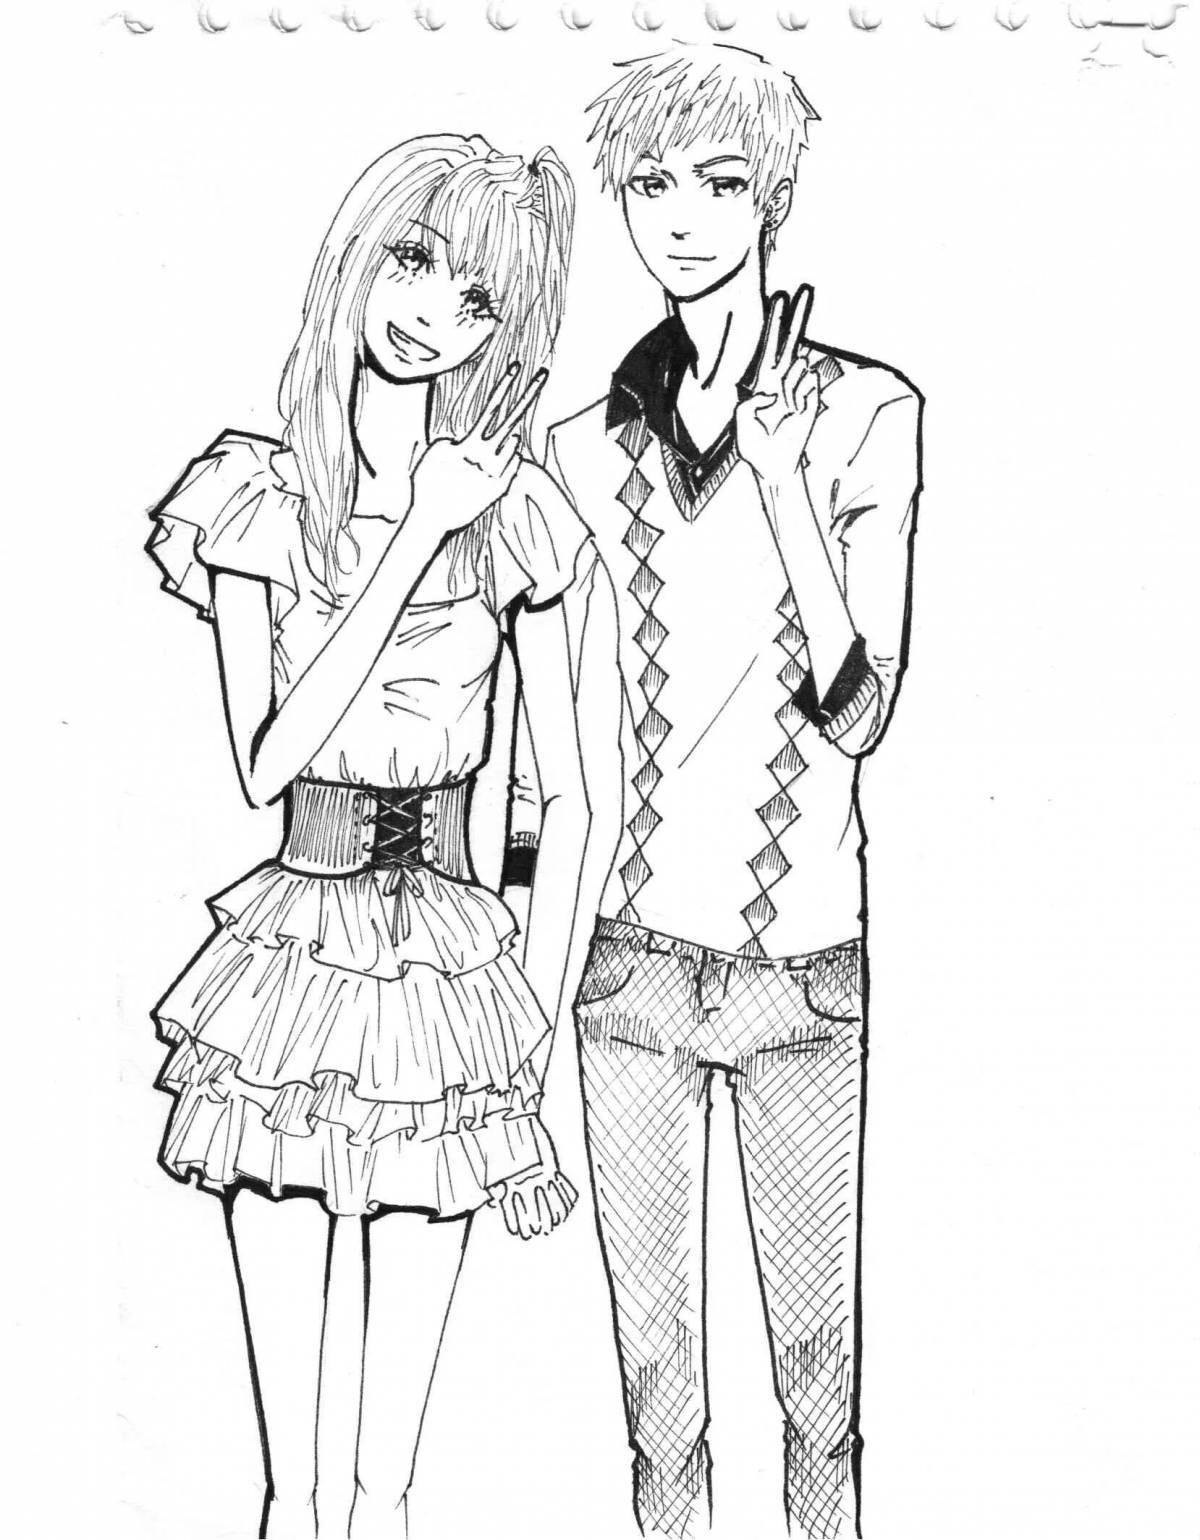 Coloring page of a piercing anime couple